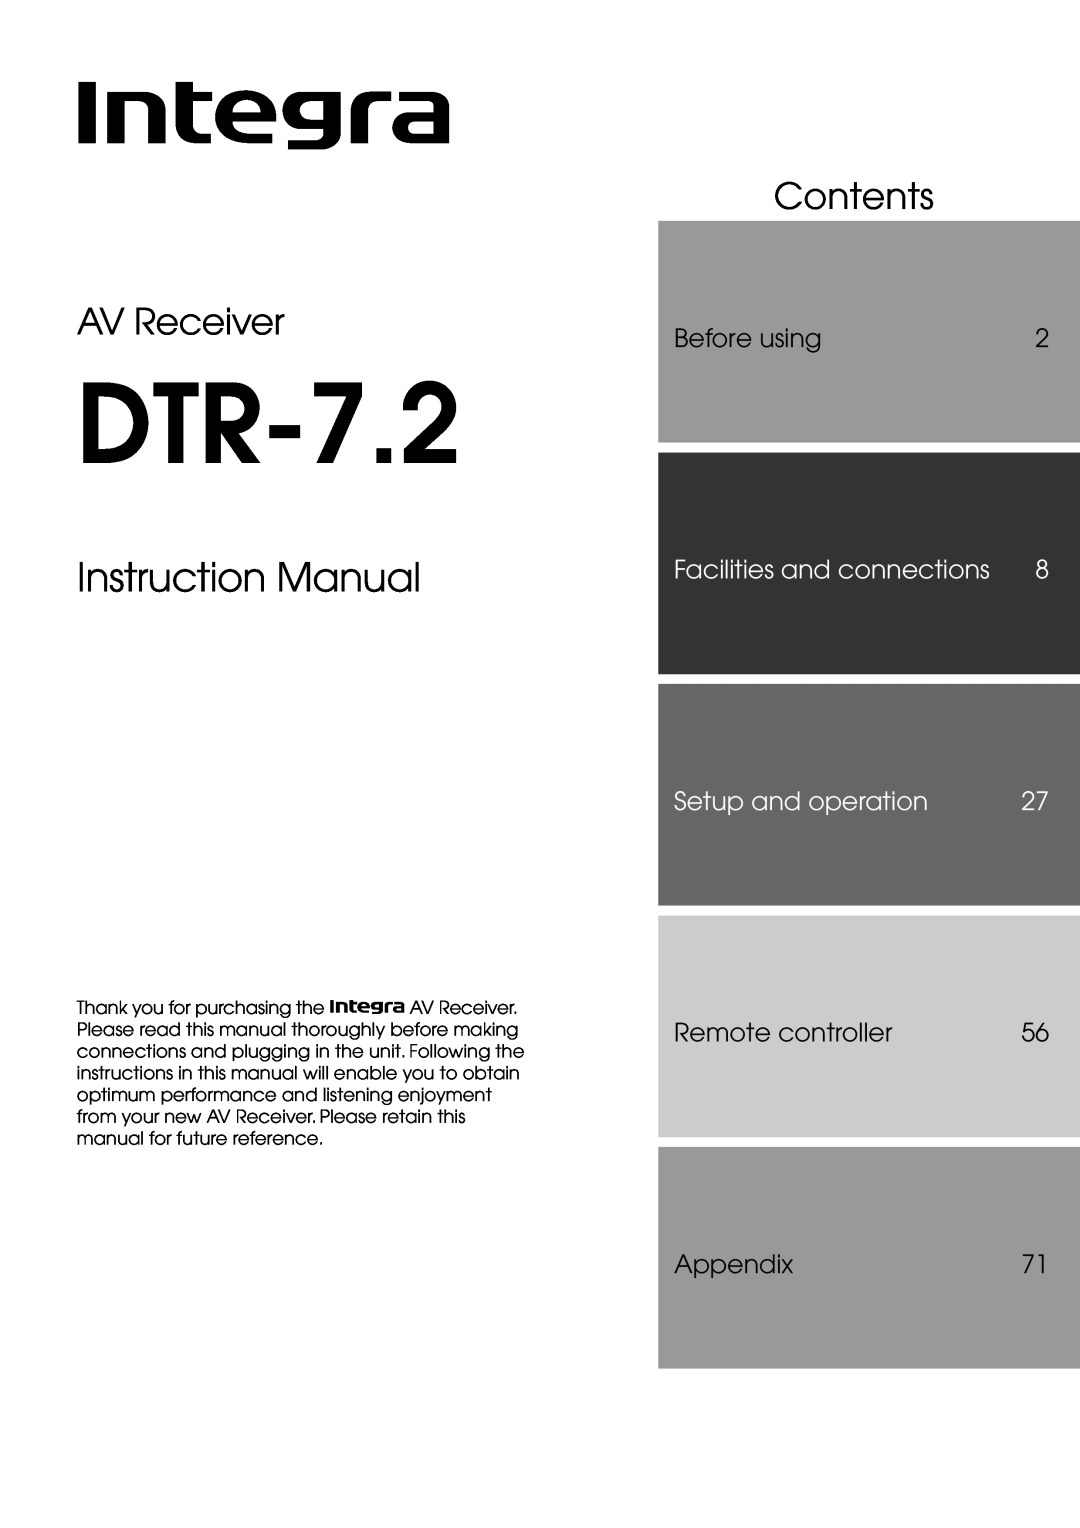 Integra DTR-7.2 instruction manual AV Receiver, Contents, Before using, Facilities and connections, Setup and operation 